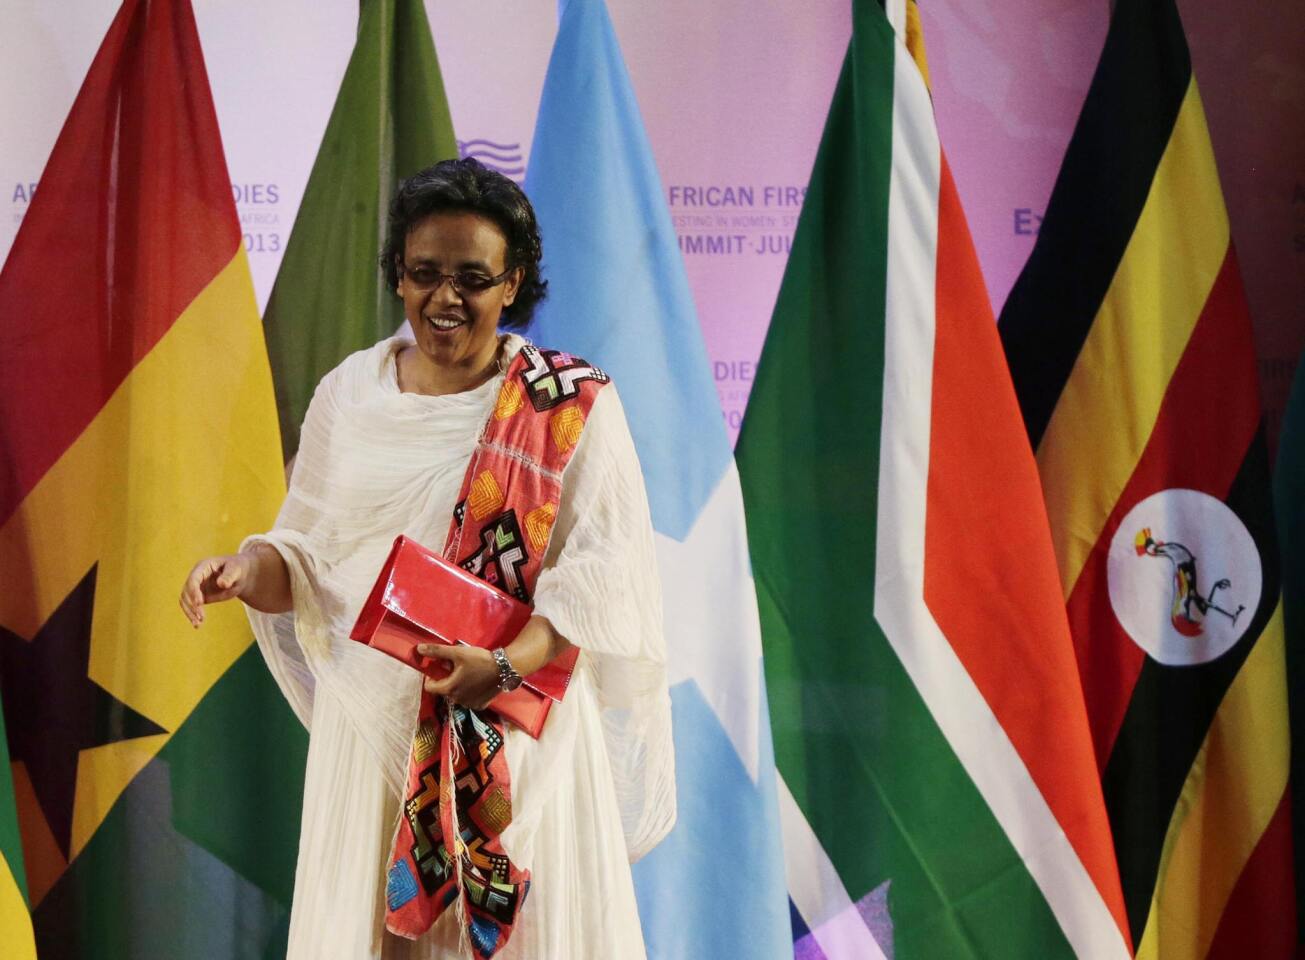 Ethiopia's First Lady Roman Tesfaye appears at the African First Ladies Summit in Dar Es Salaam